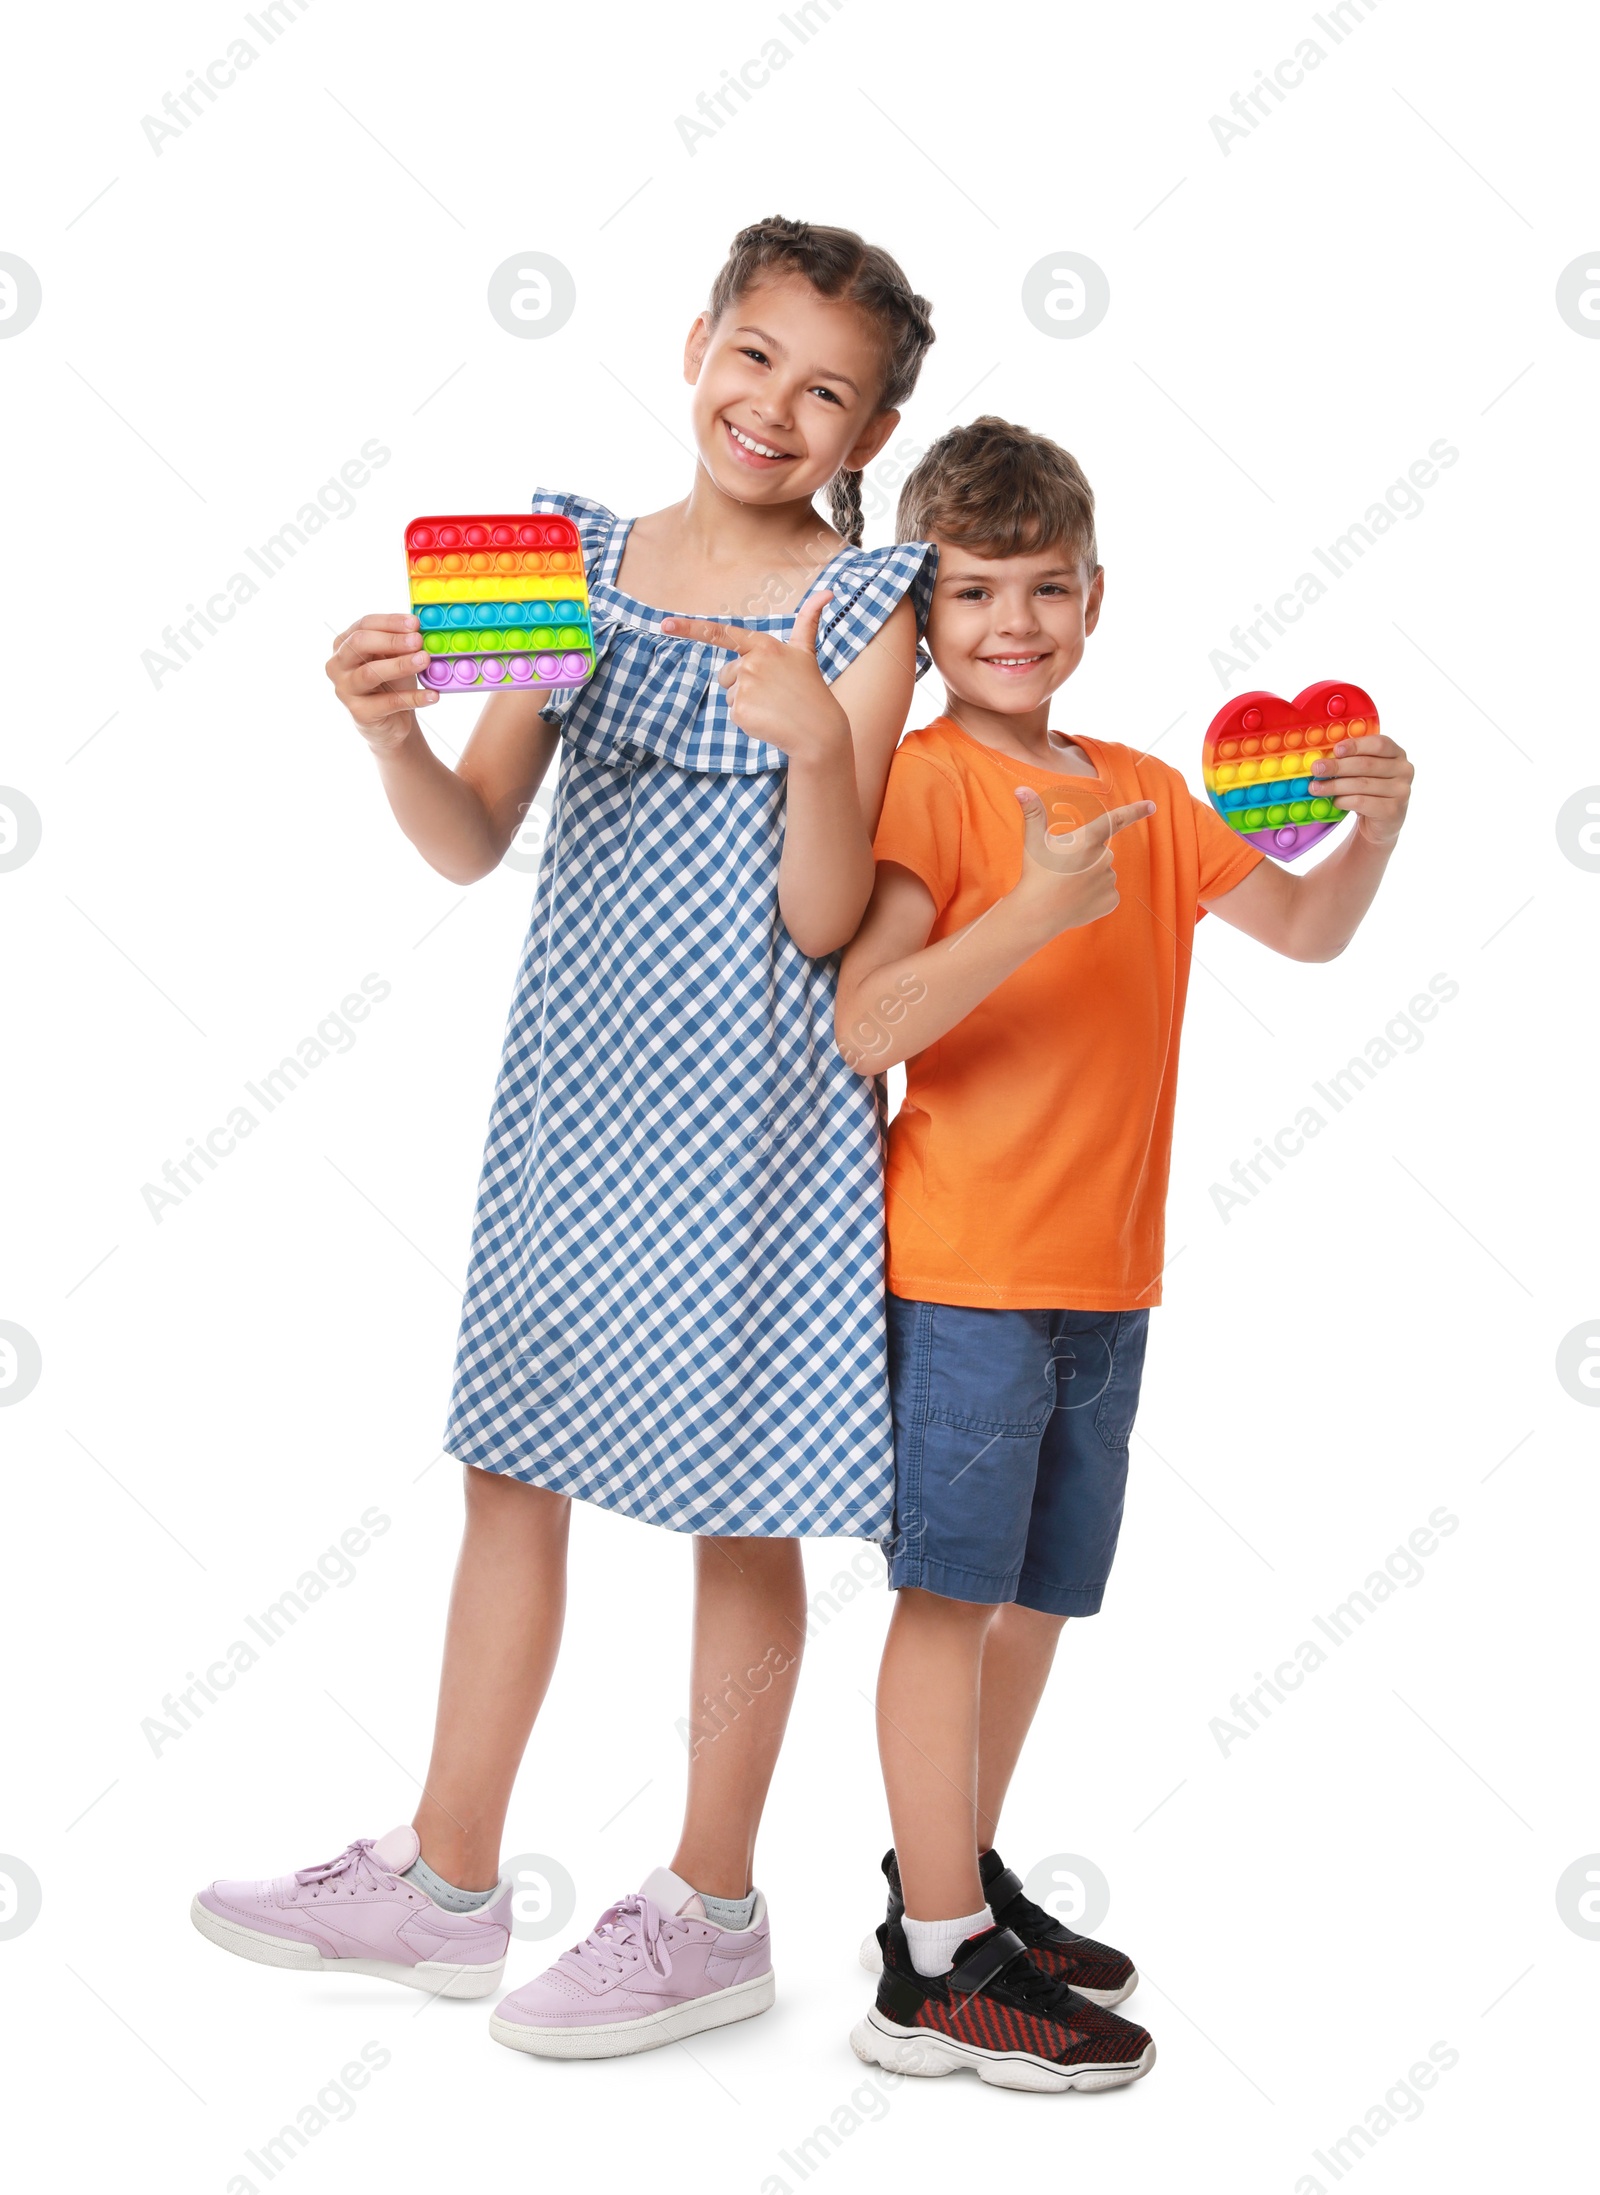 Photo of Children with pop it fidget toys on white background